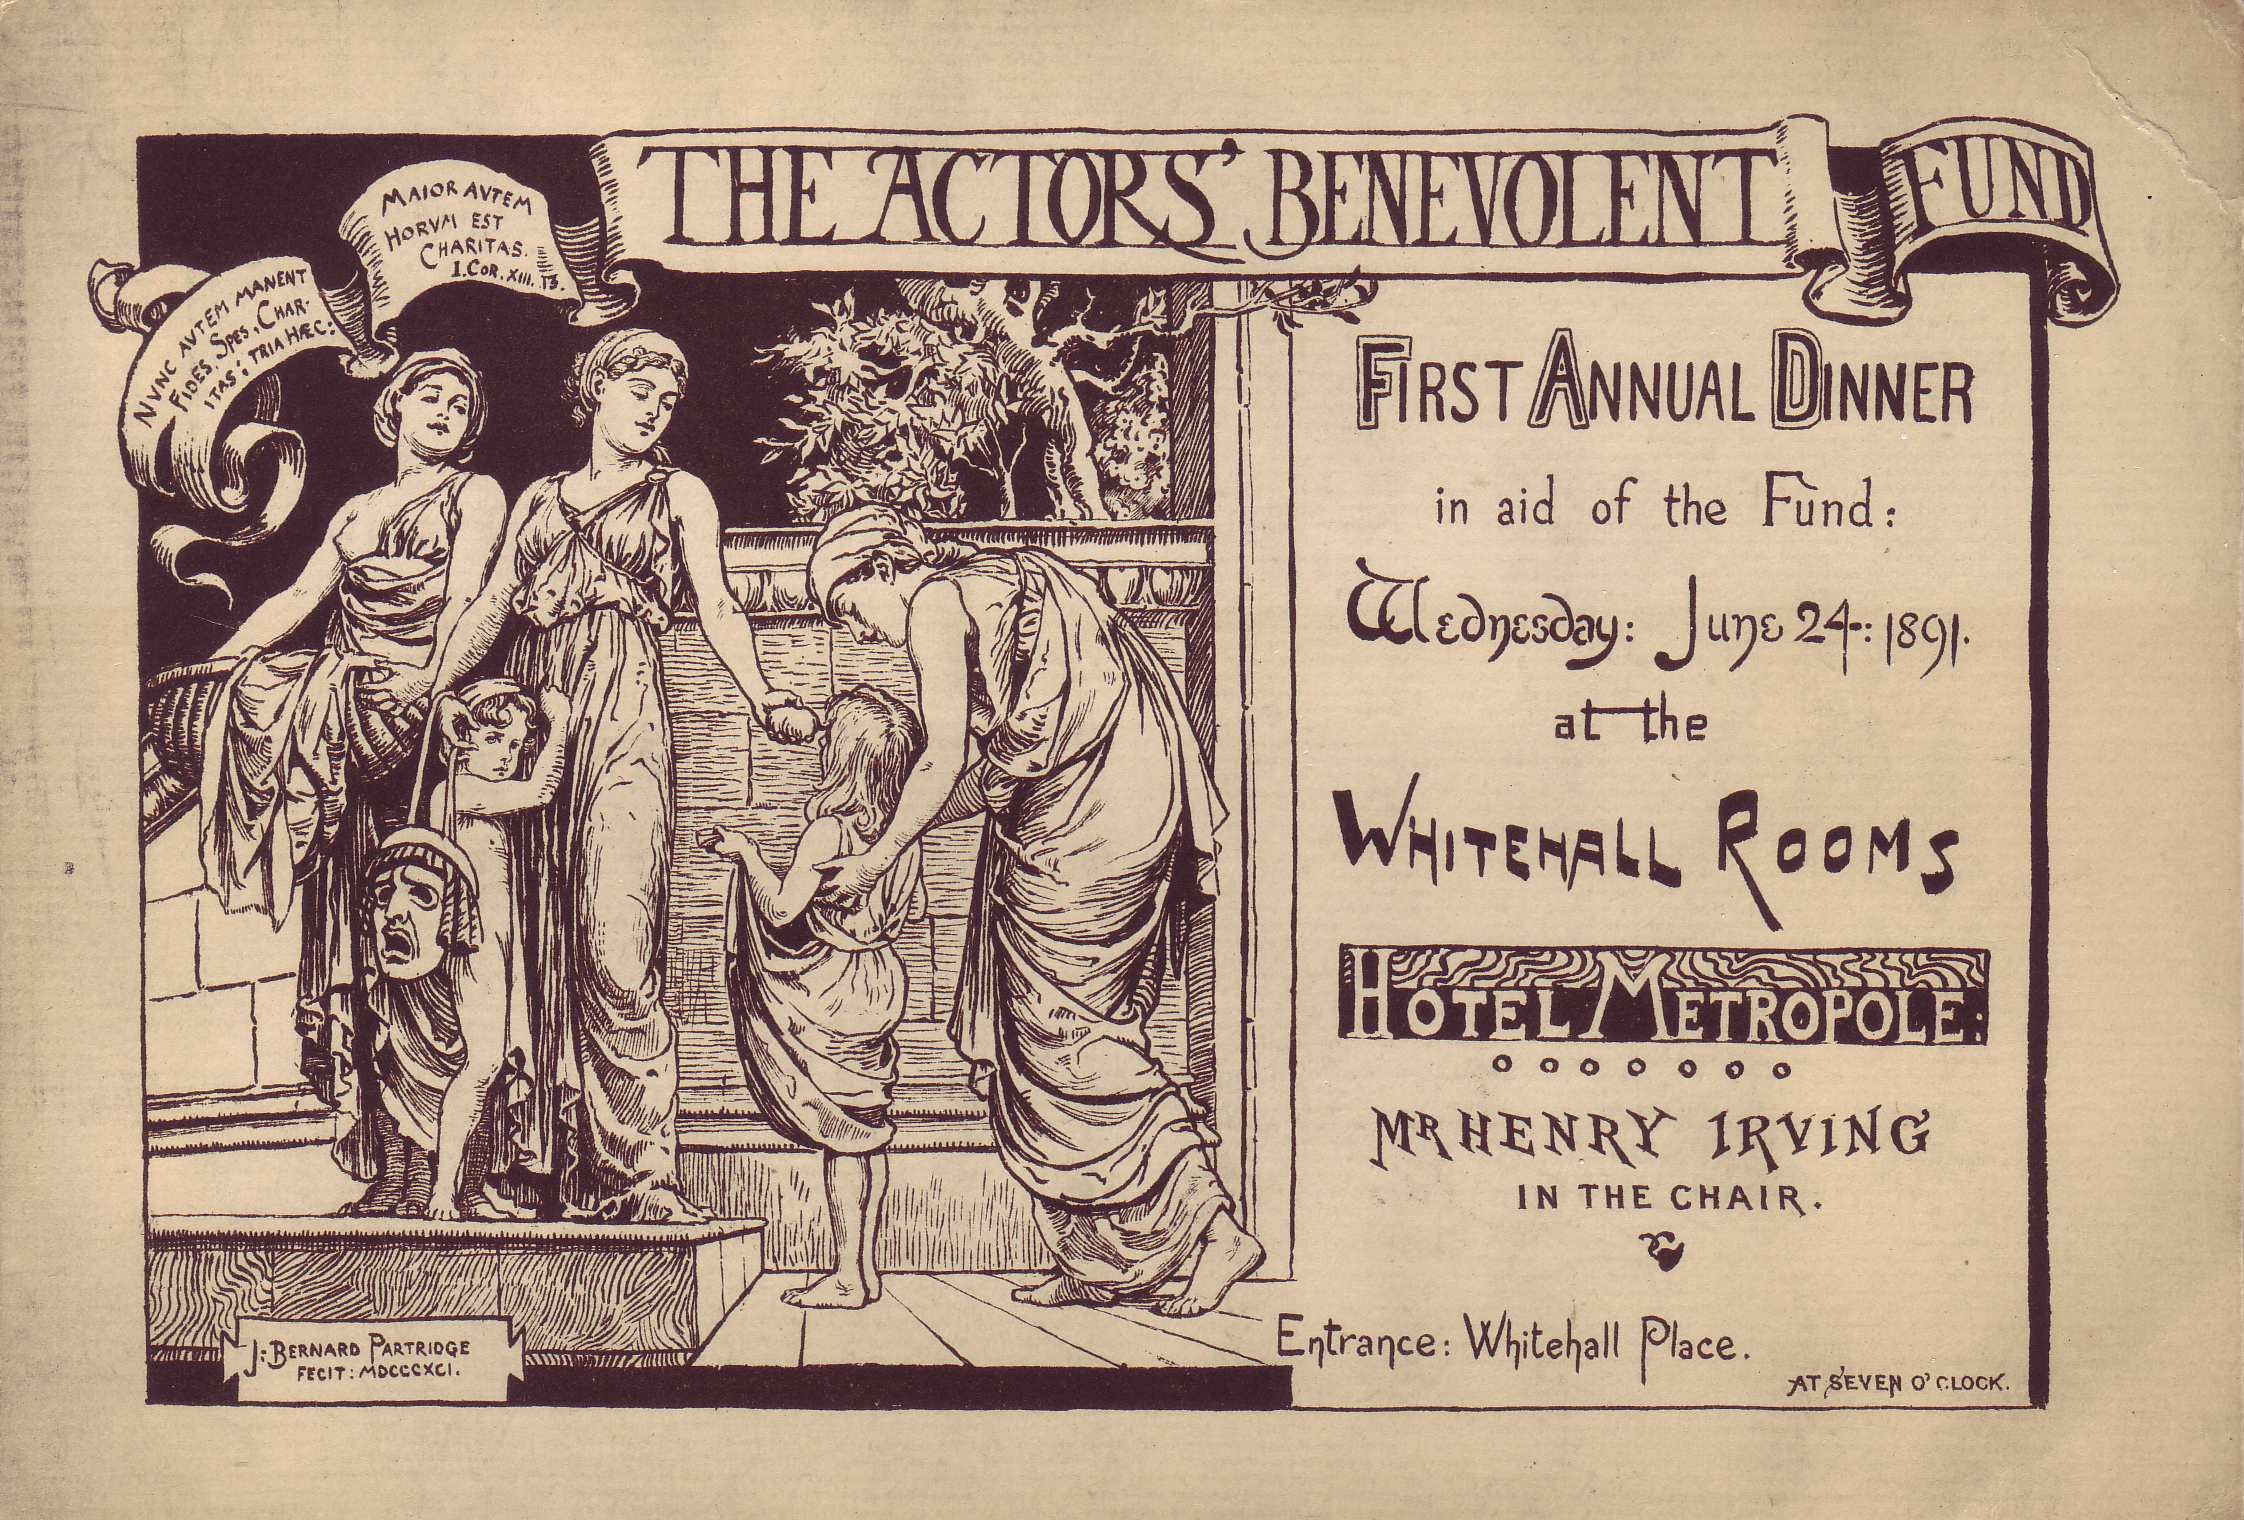 Flyer for the ABF's First Annual Dinner, 1891